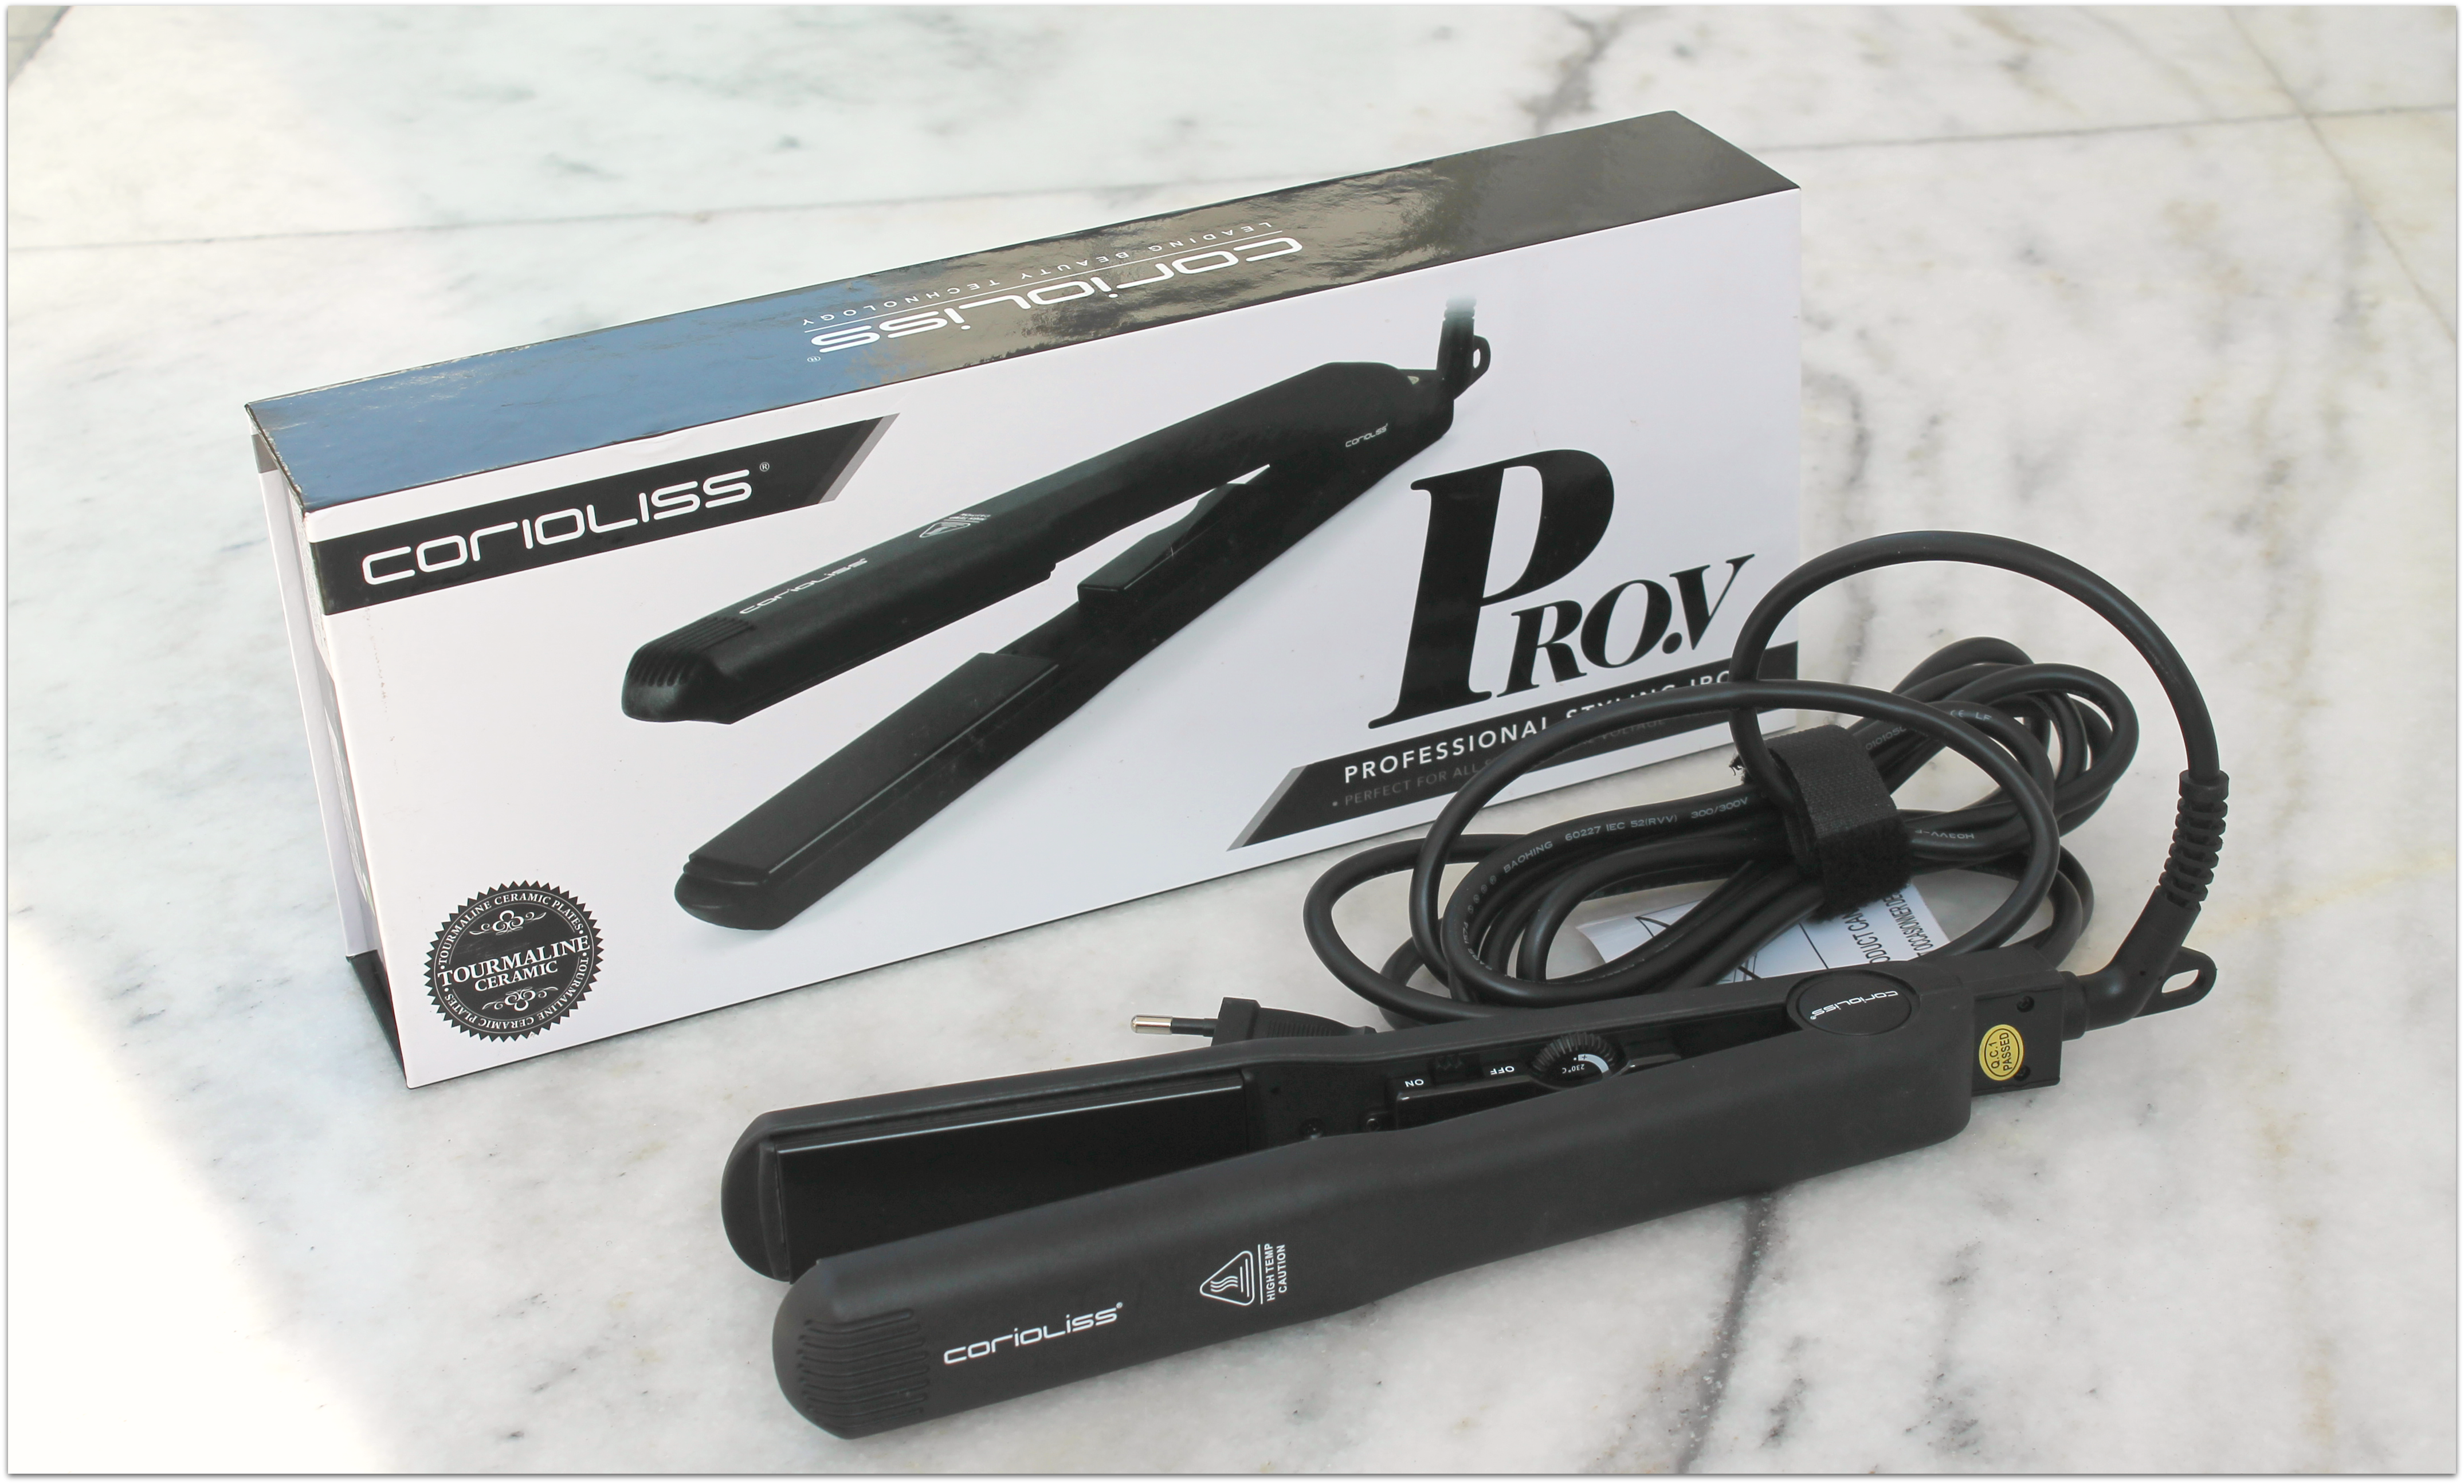 Corioliss Pro V Hair Straightener Review - Beauty and Blush